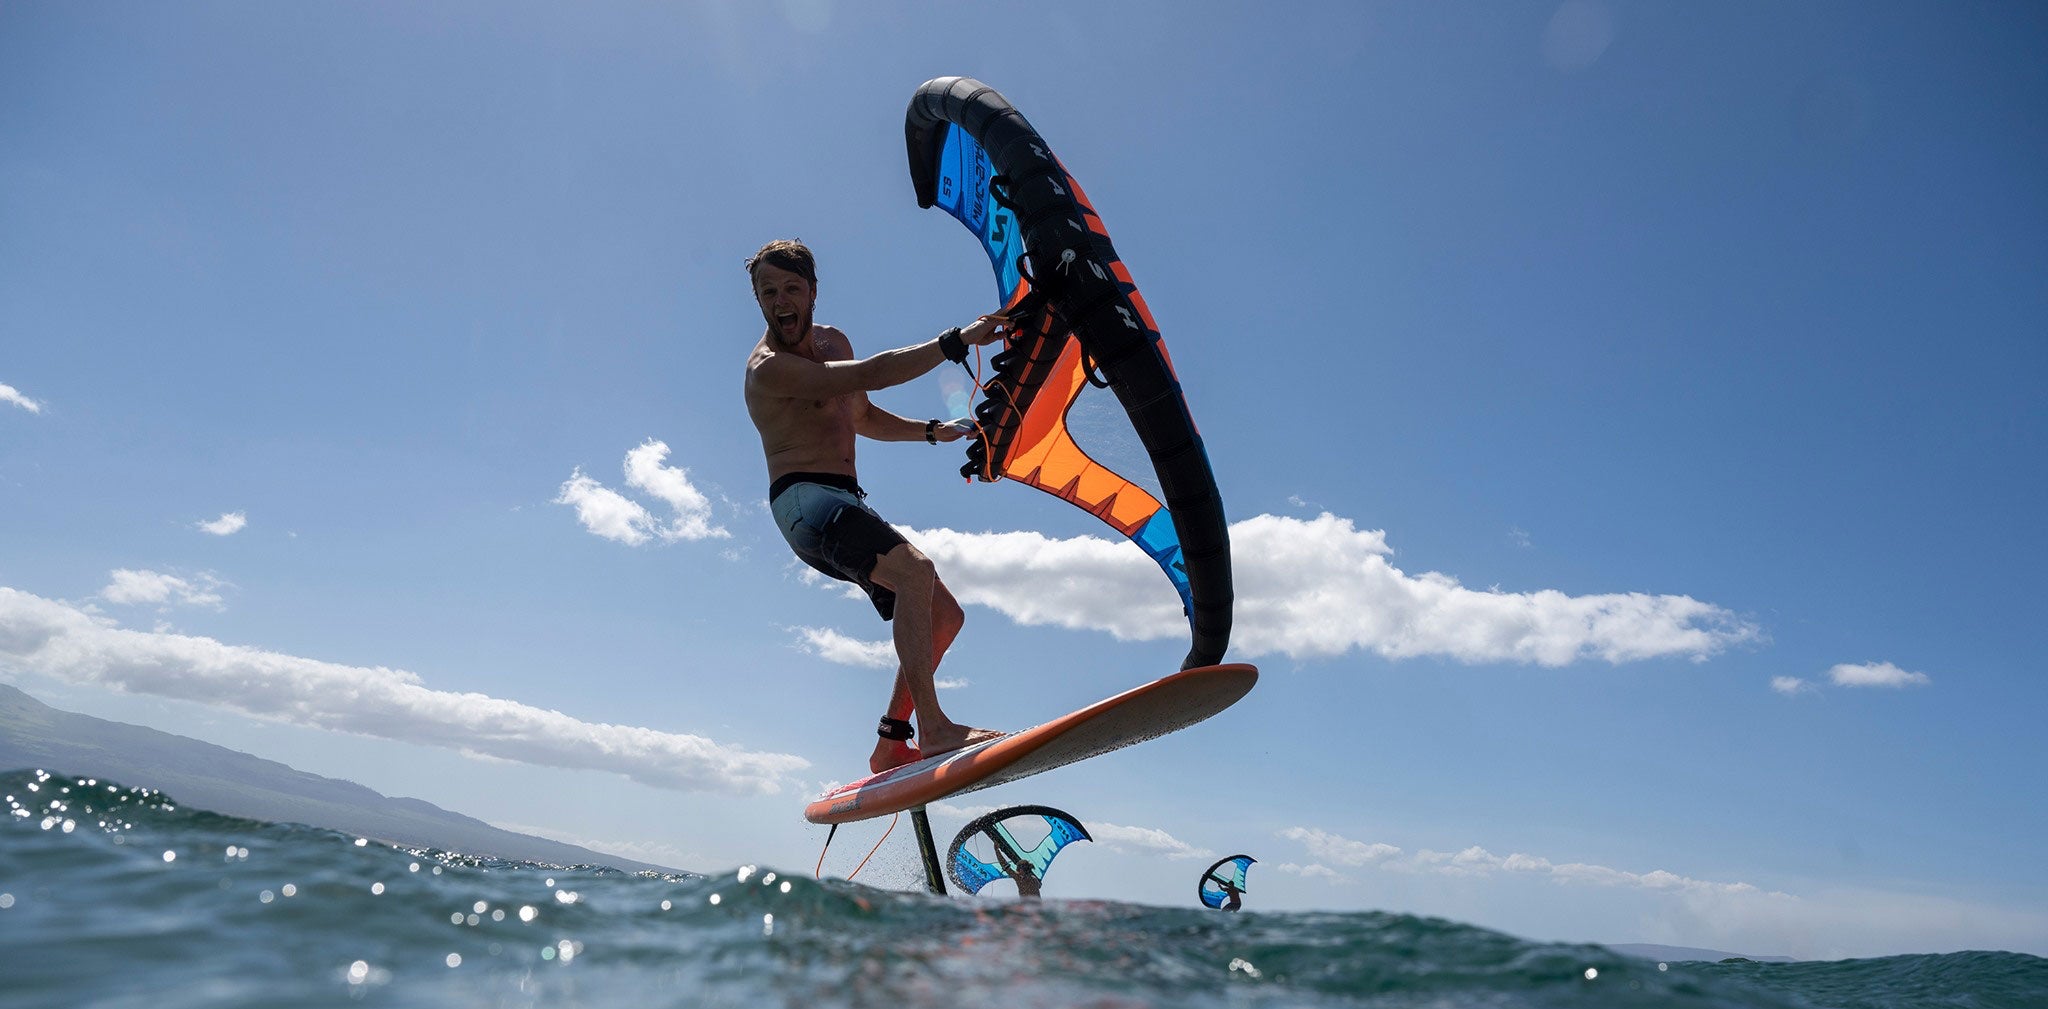 Wing Foiling - Wing Surfing - What's The Hype About - Skymonster Watersports